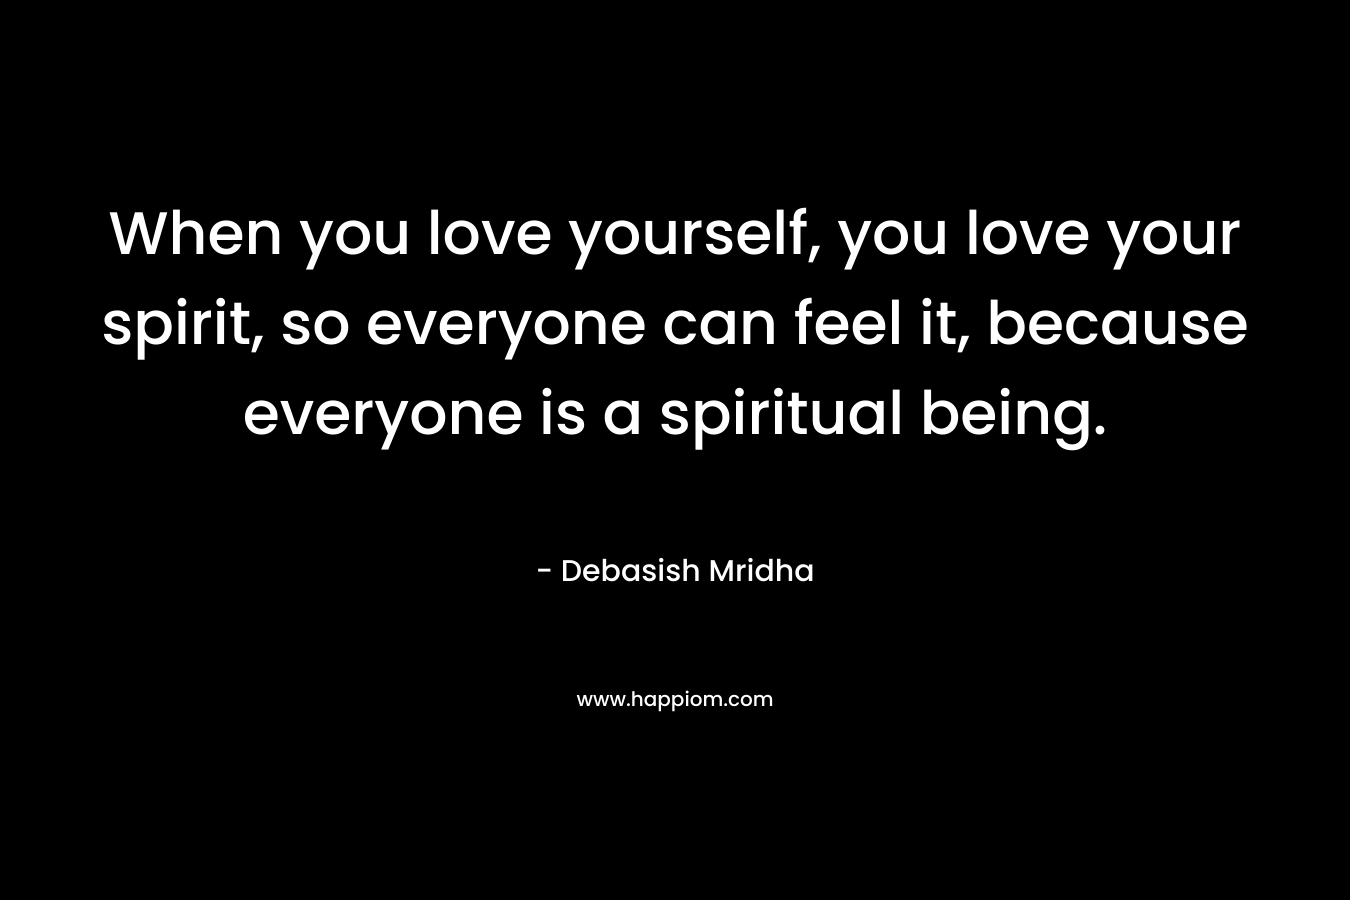 When you love yourself, you love your spirit, so everyone can feel it, because everyone is a spiritual being.